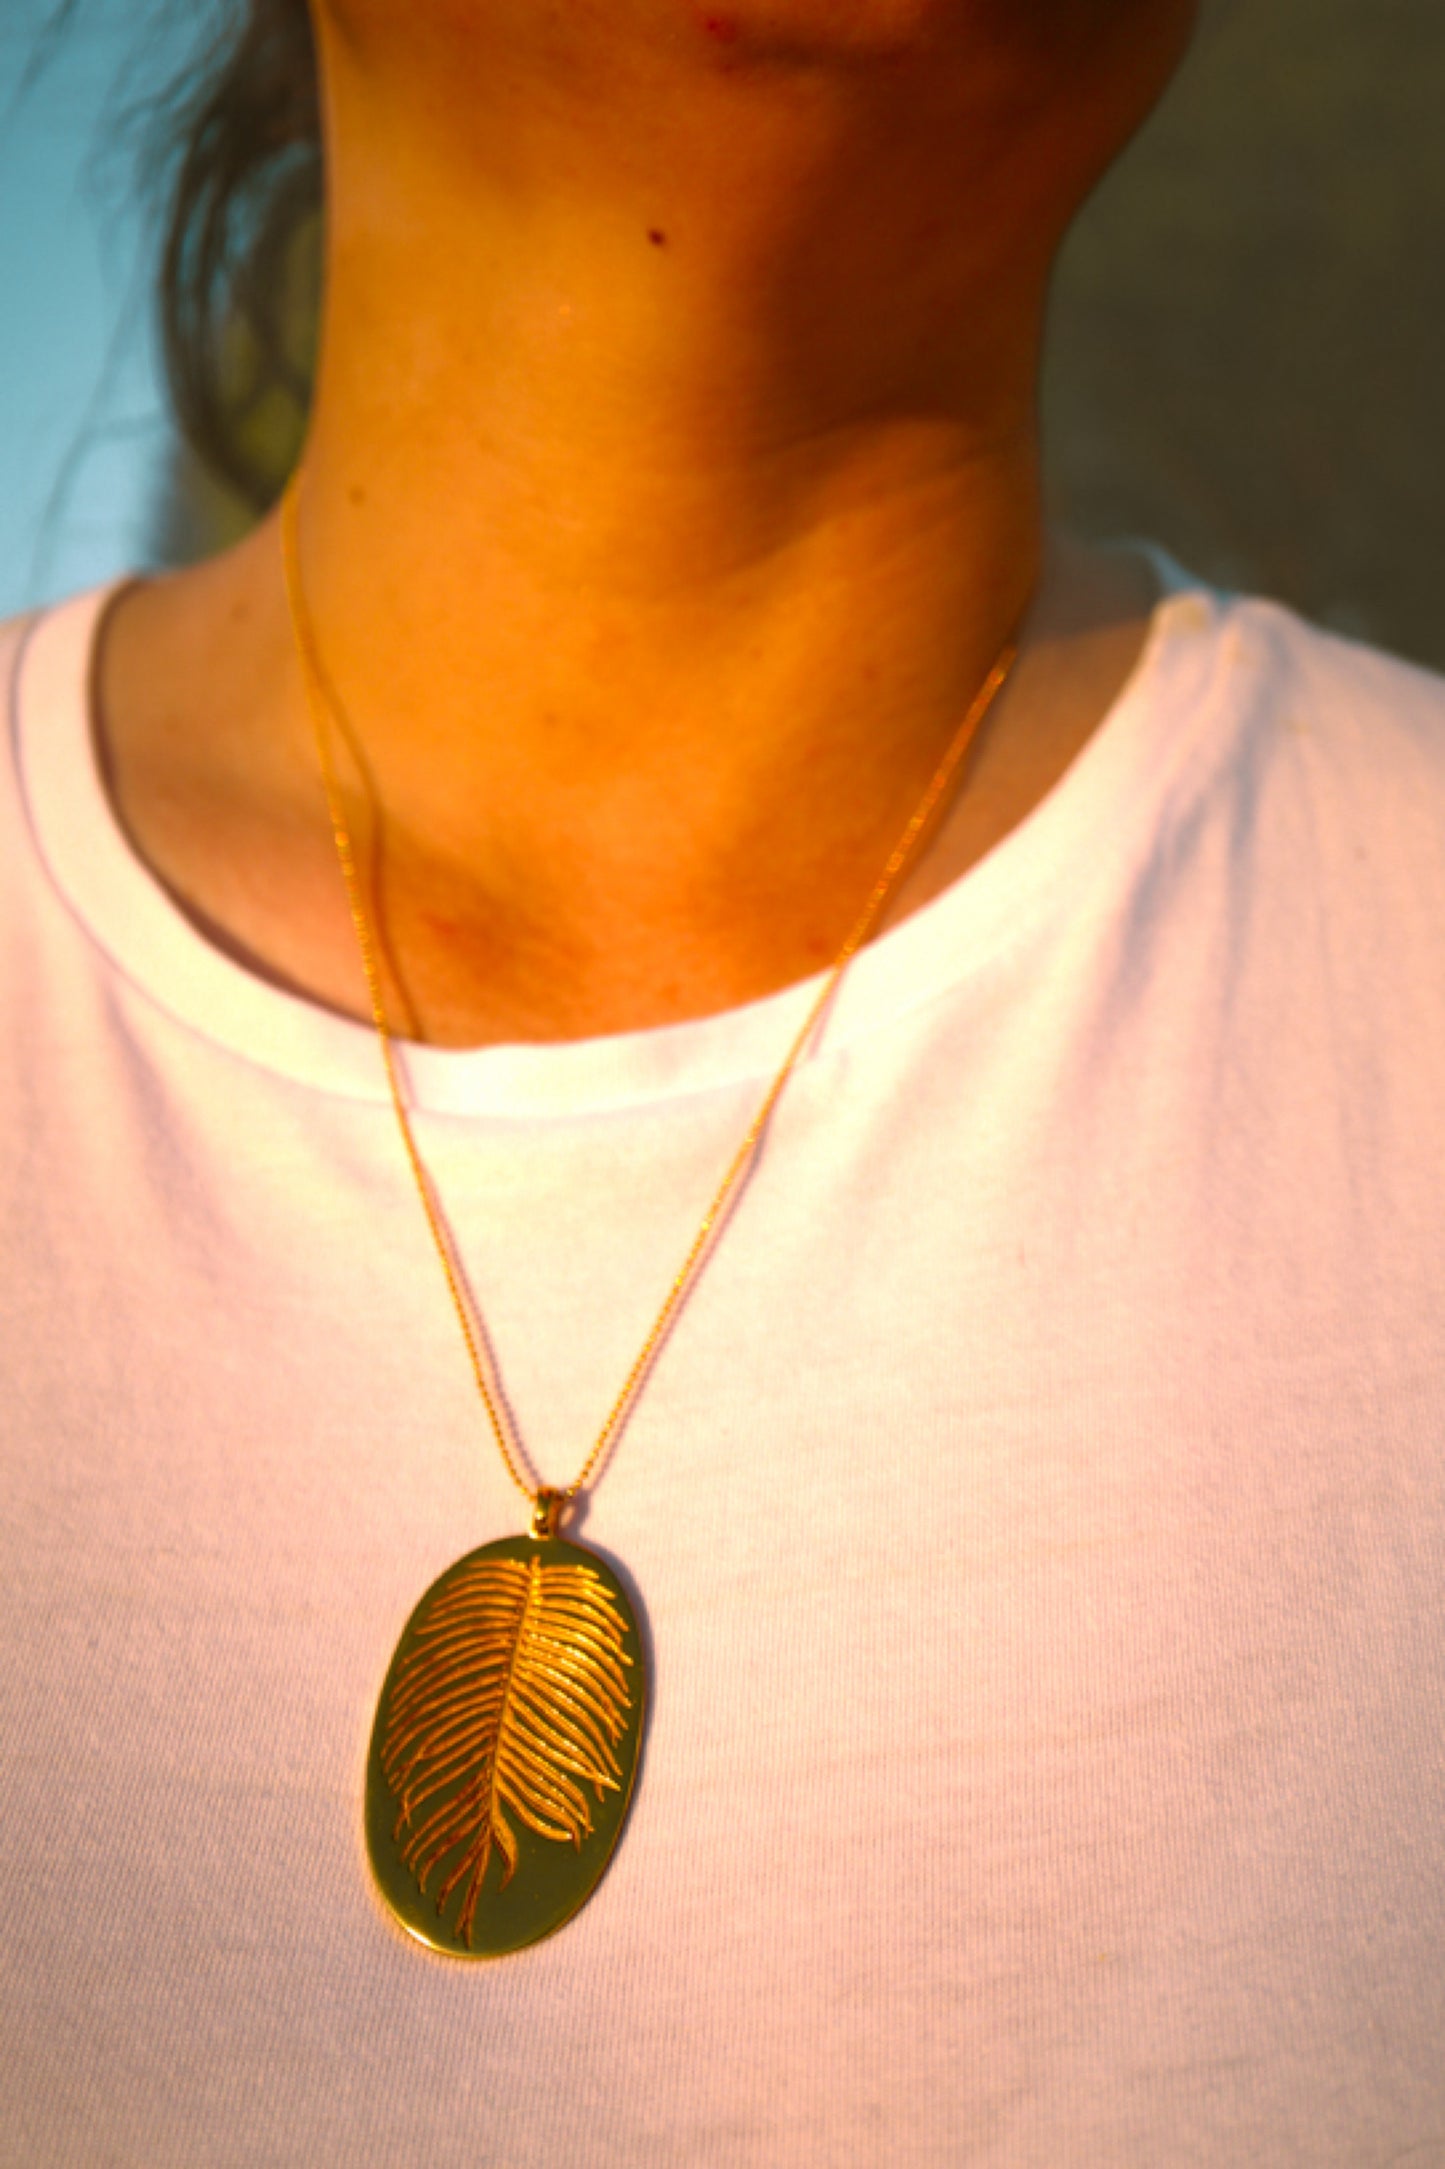 The Croatii Necklace